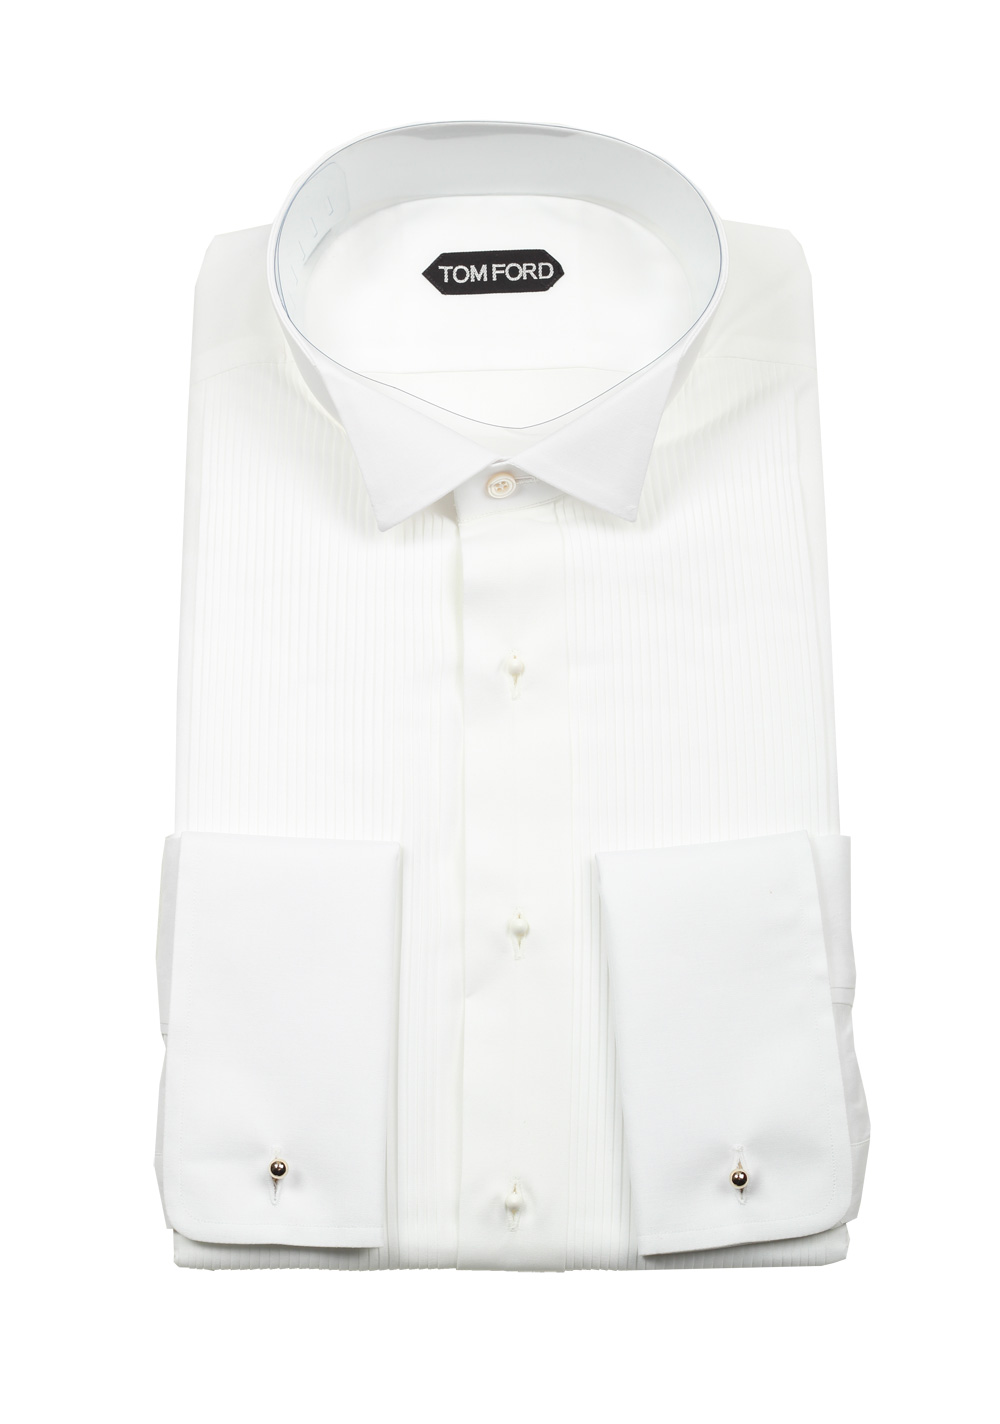 TOM FORD Solid White Signature Tuxedo Shirt With French Cuffs | Costume ...